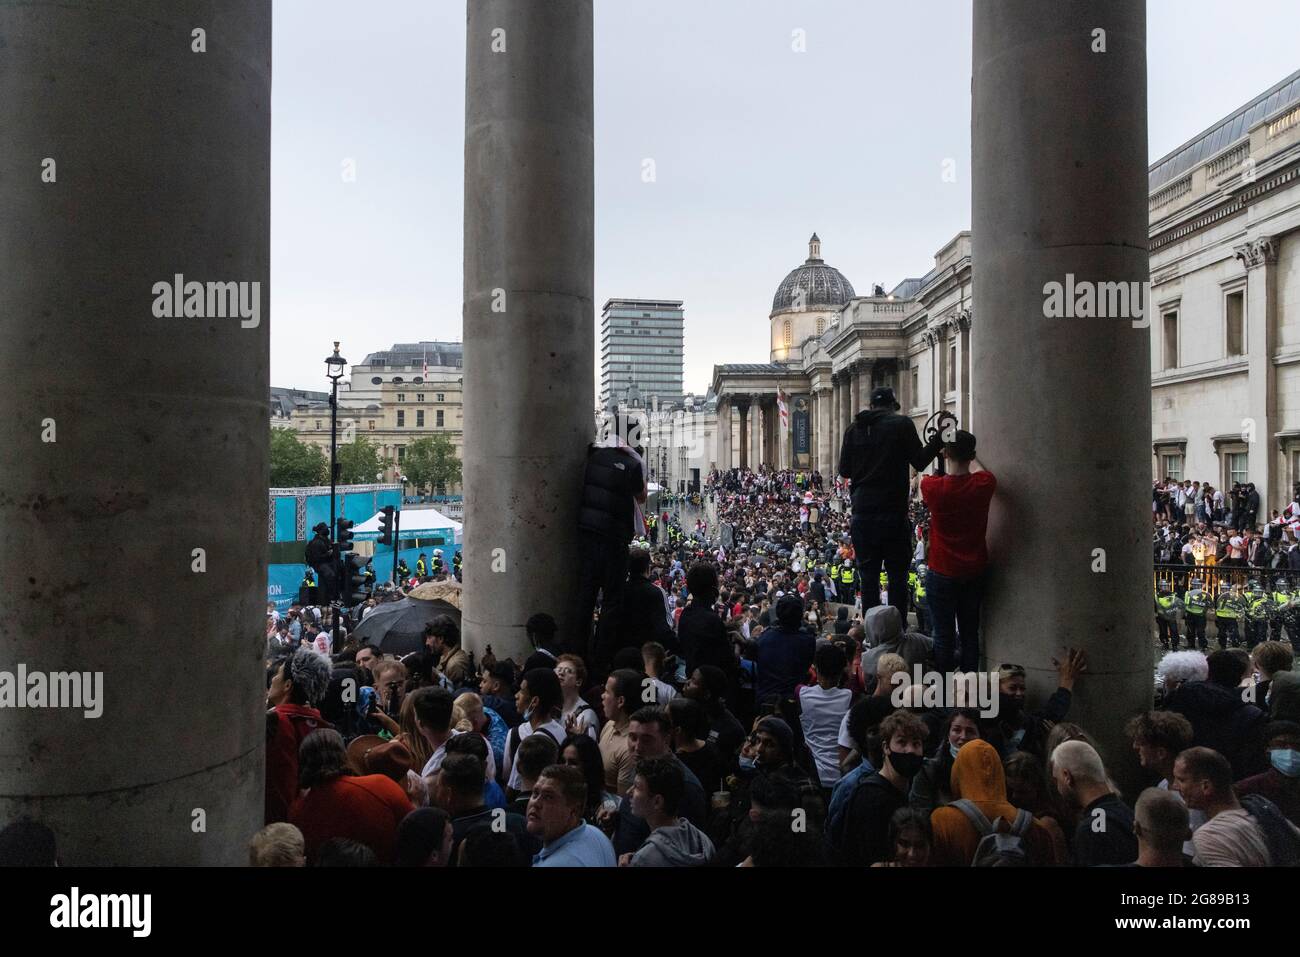 A crowd of England fans outside fan zone during the England vs Italy Euro 2020 final, Trafalgar Square, London, 11 July 2021 Stock Photo